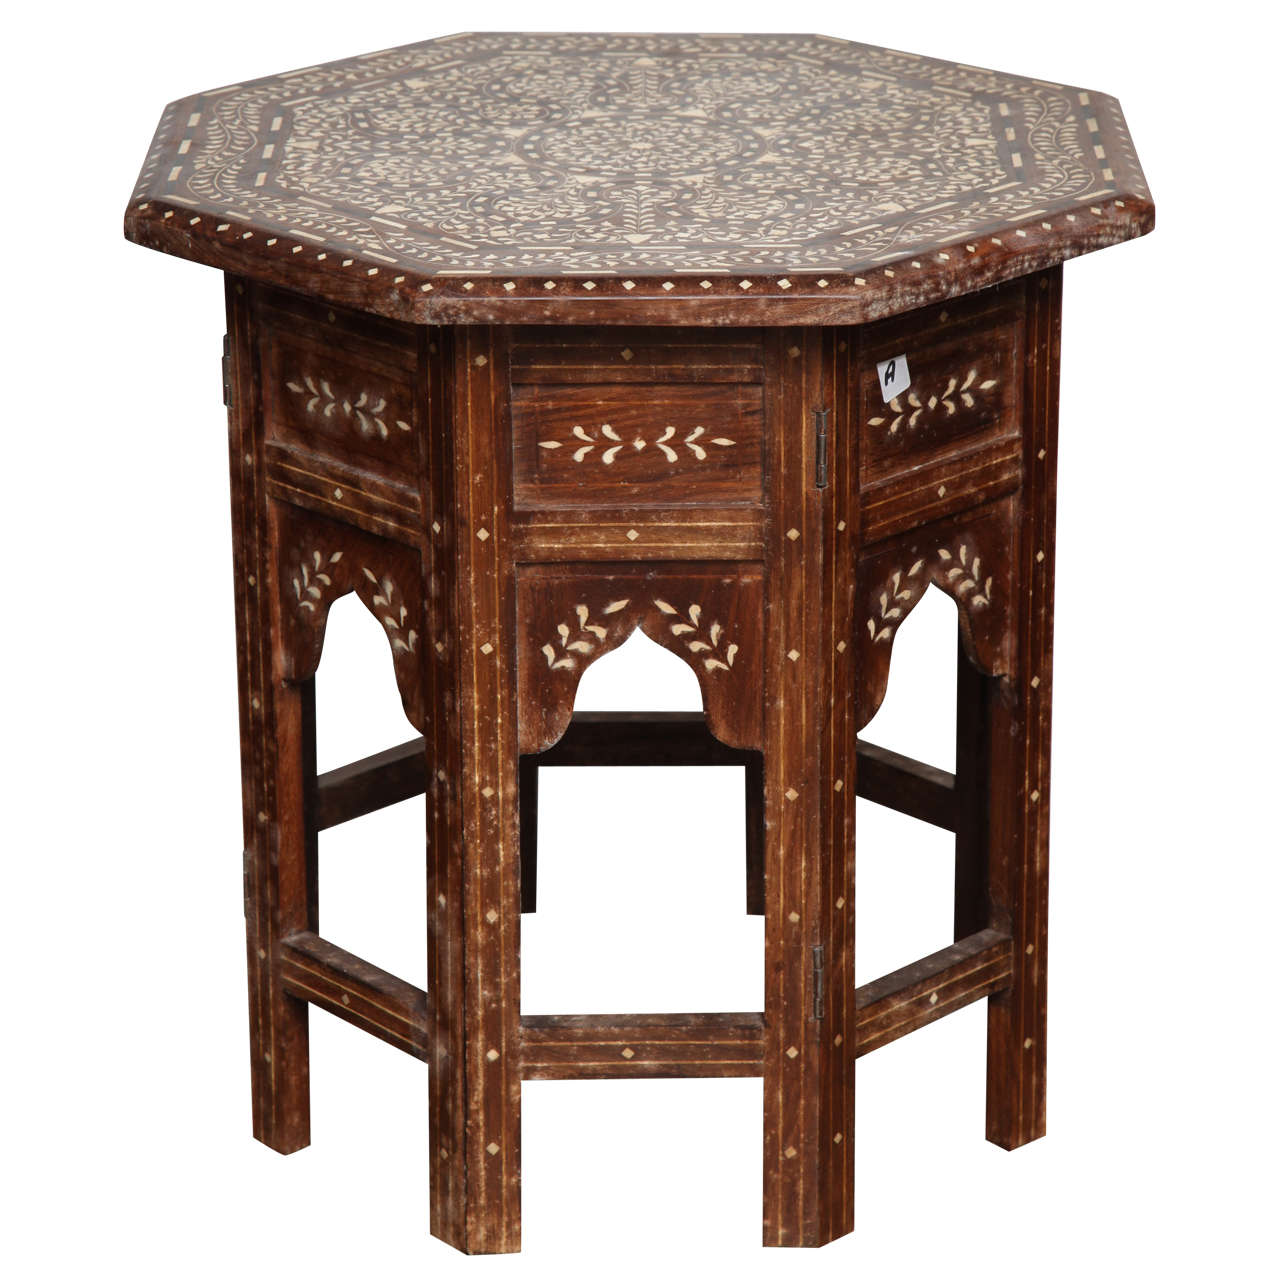 Small Inlaid Octagonal Table